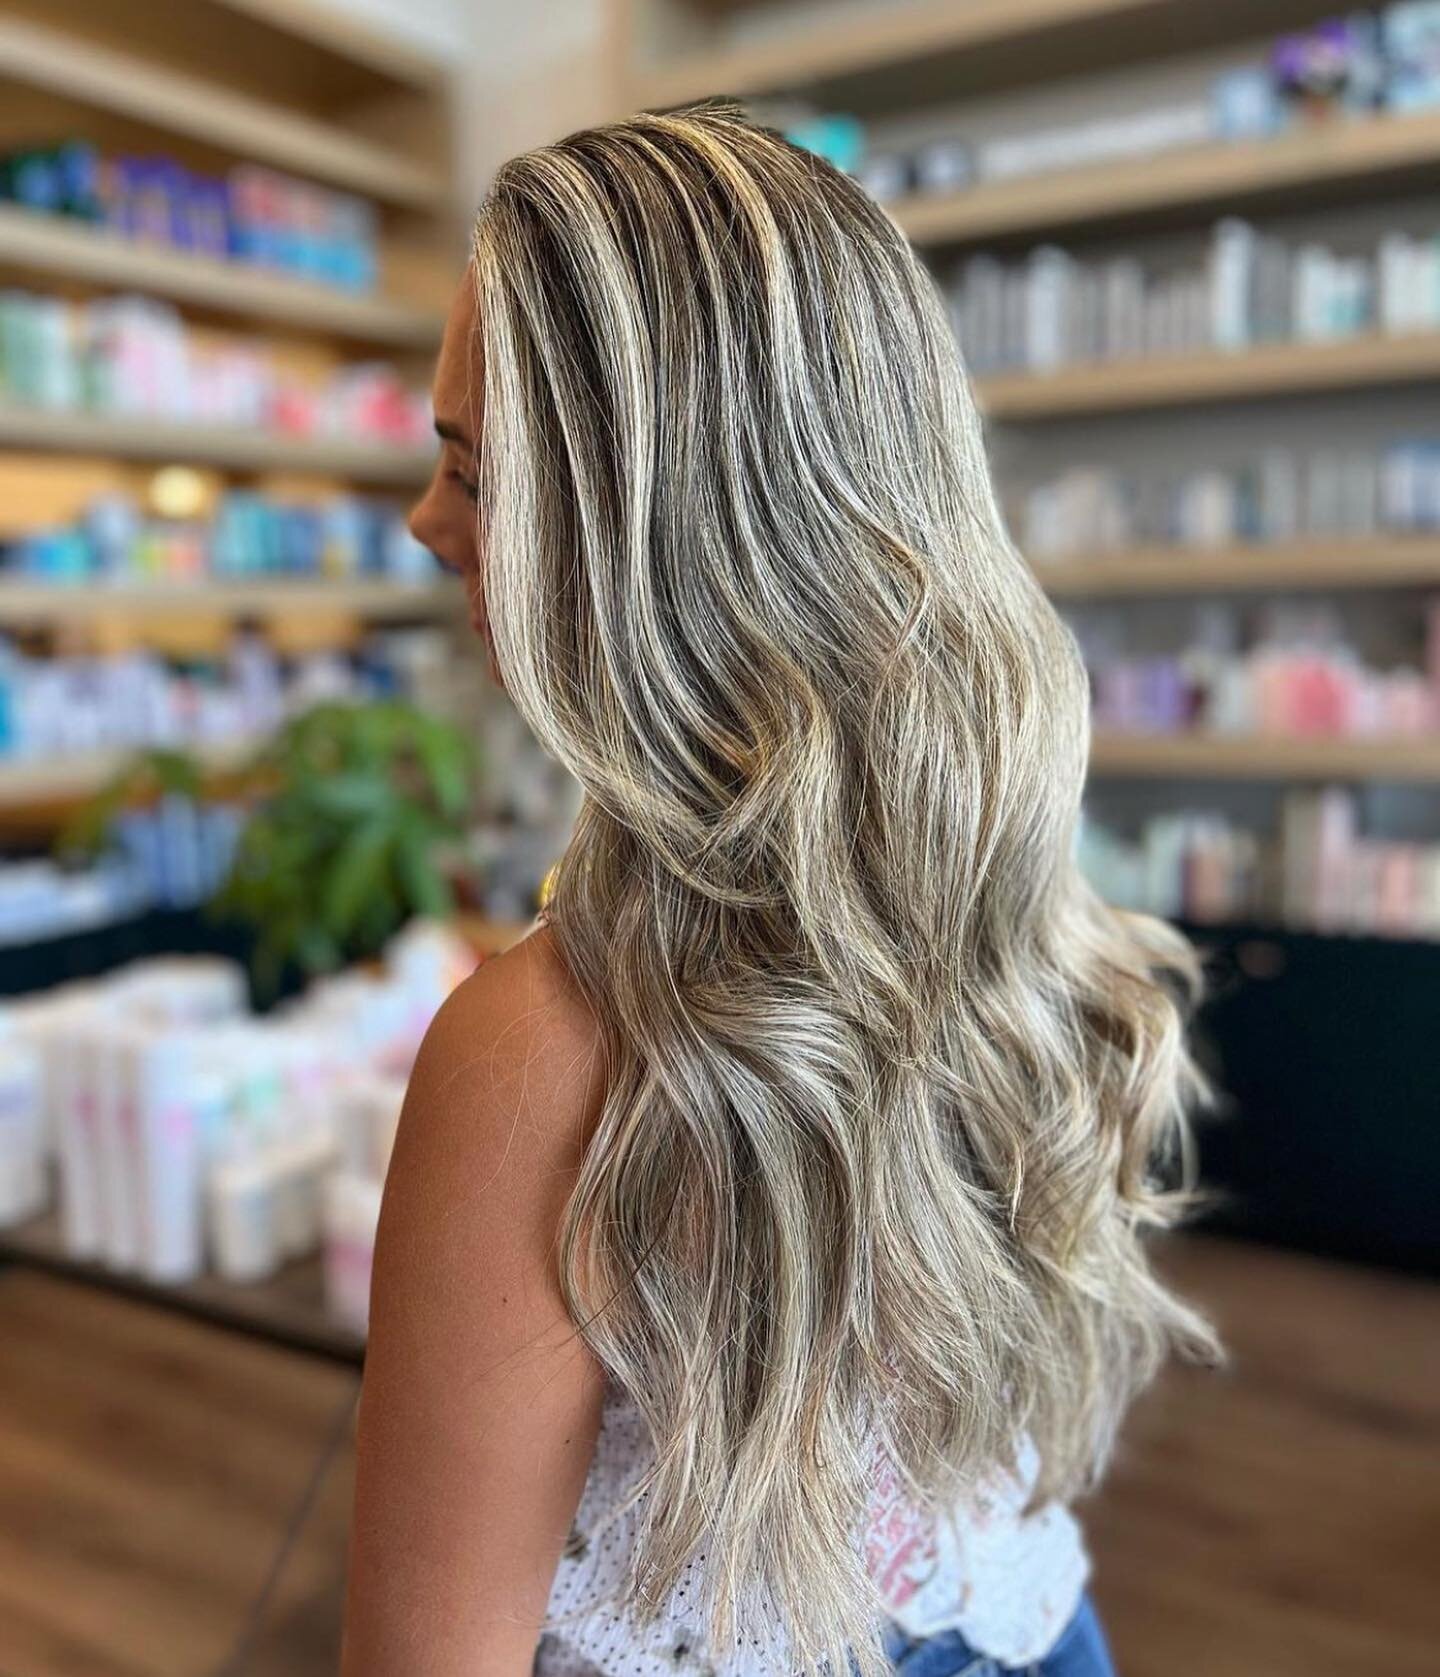 Who else is getting a fresh look for the fall season? @curioushairwesthillsyyc has the most talented team, an extensive selection of haircare products and is open 7 days a week! For the guys, check out @denimandsmith_westhills.

Stylist: Bianca💇🏼&z